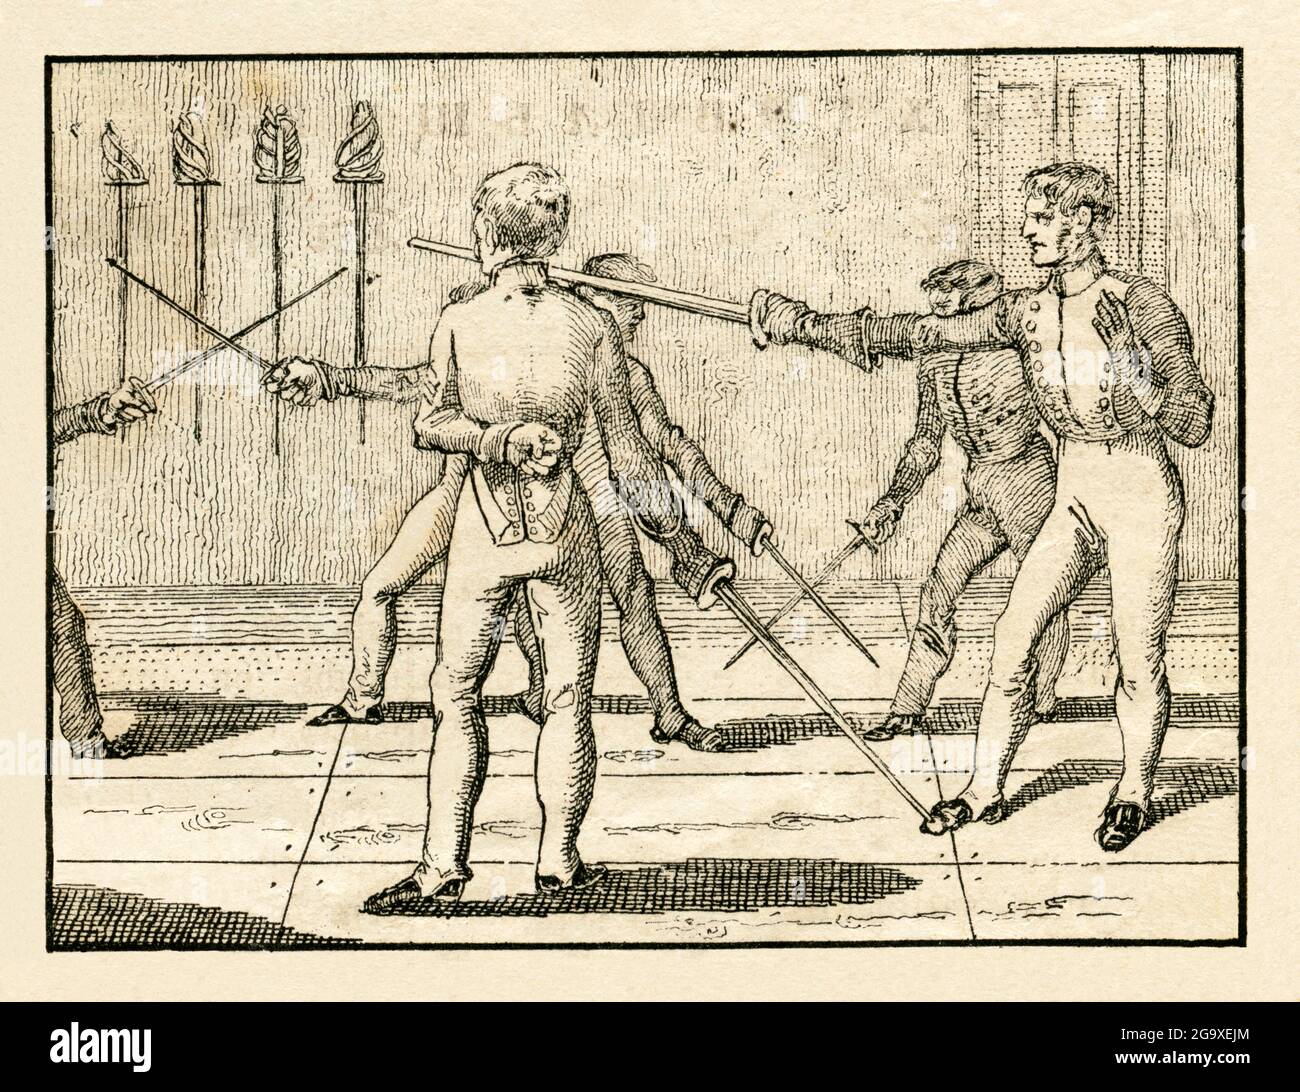 fencing exercise, titl 'Heroism and courage', image from: 'Neuer Orbis Pictus für die Jugend, ADDITIONAL-RIGHTS-CLEARANCE-INFO-NOT-AVAILABLE Stock Photo